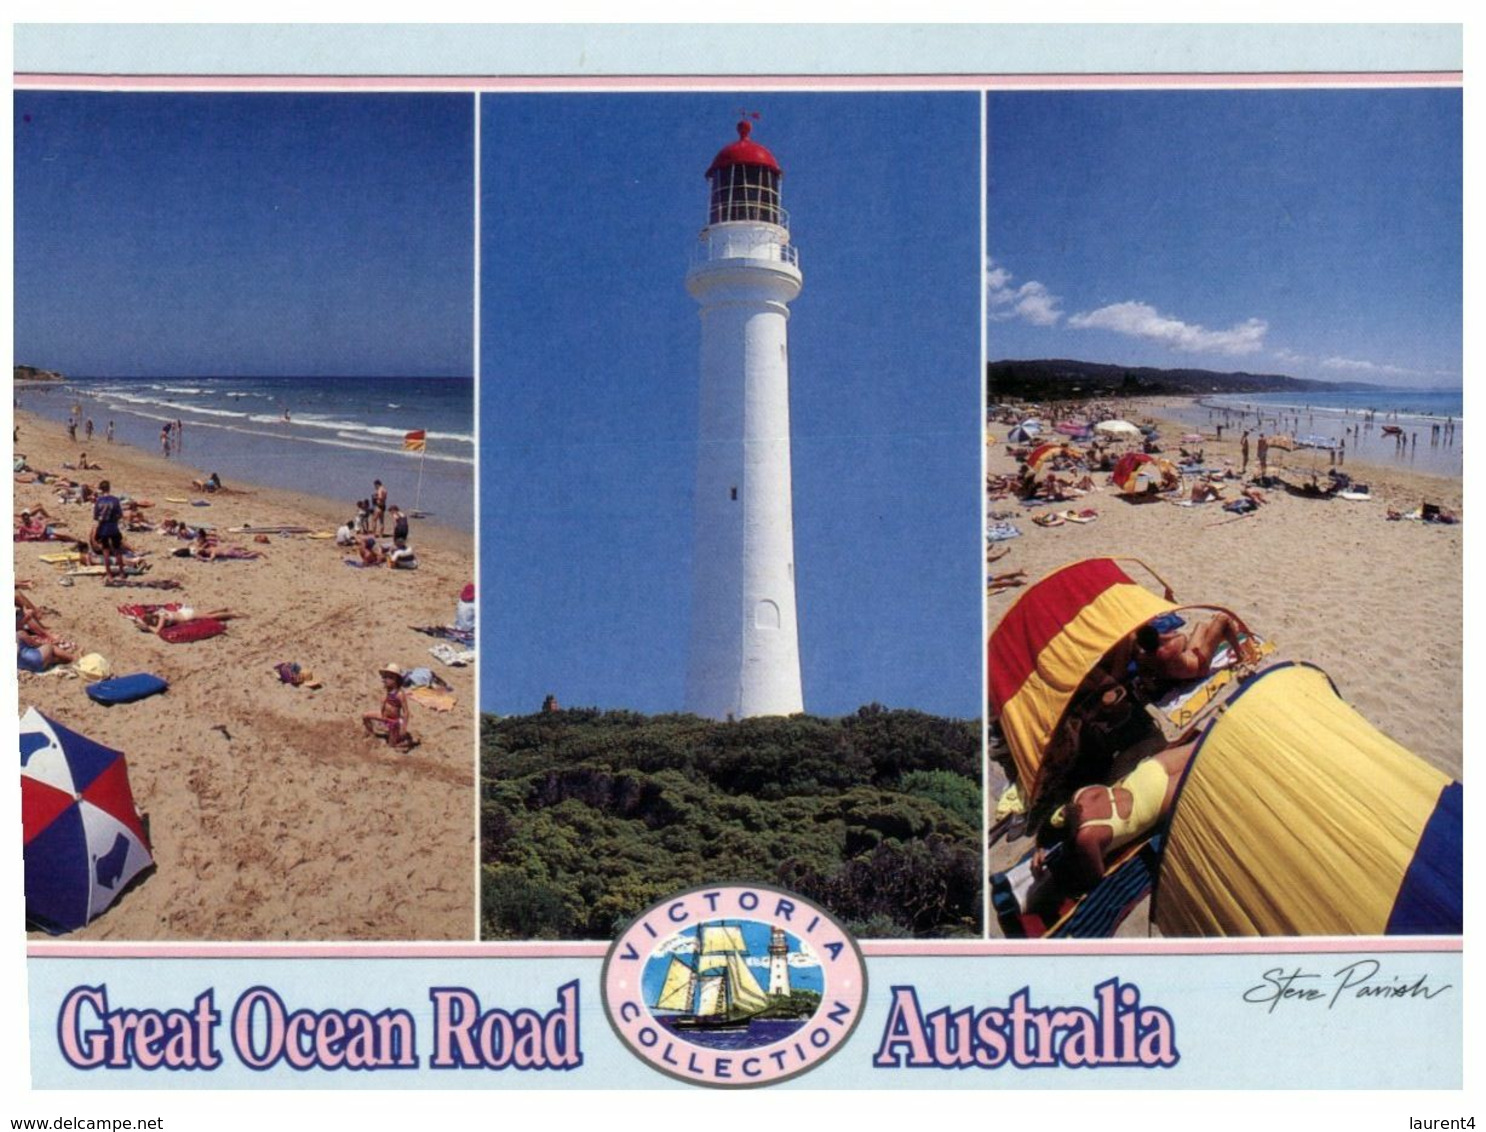 (K 26) Australia - VIC - Great Ocean Road With Spit Bridge Lighthouse (PC3071) - Geelong